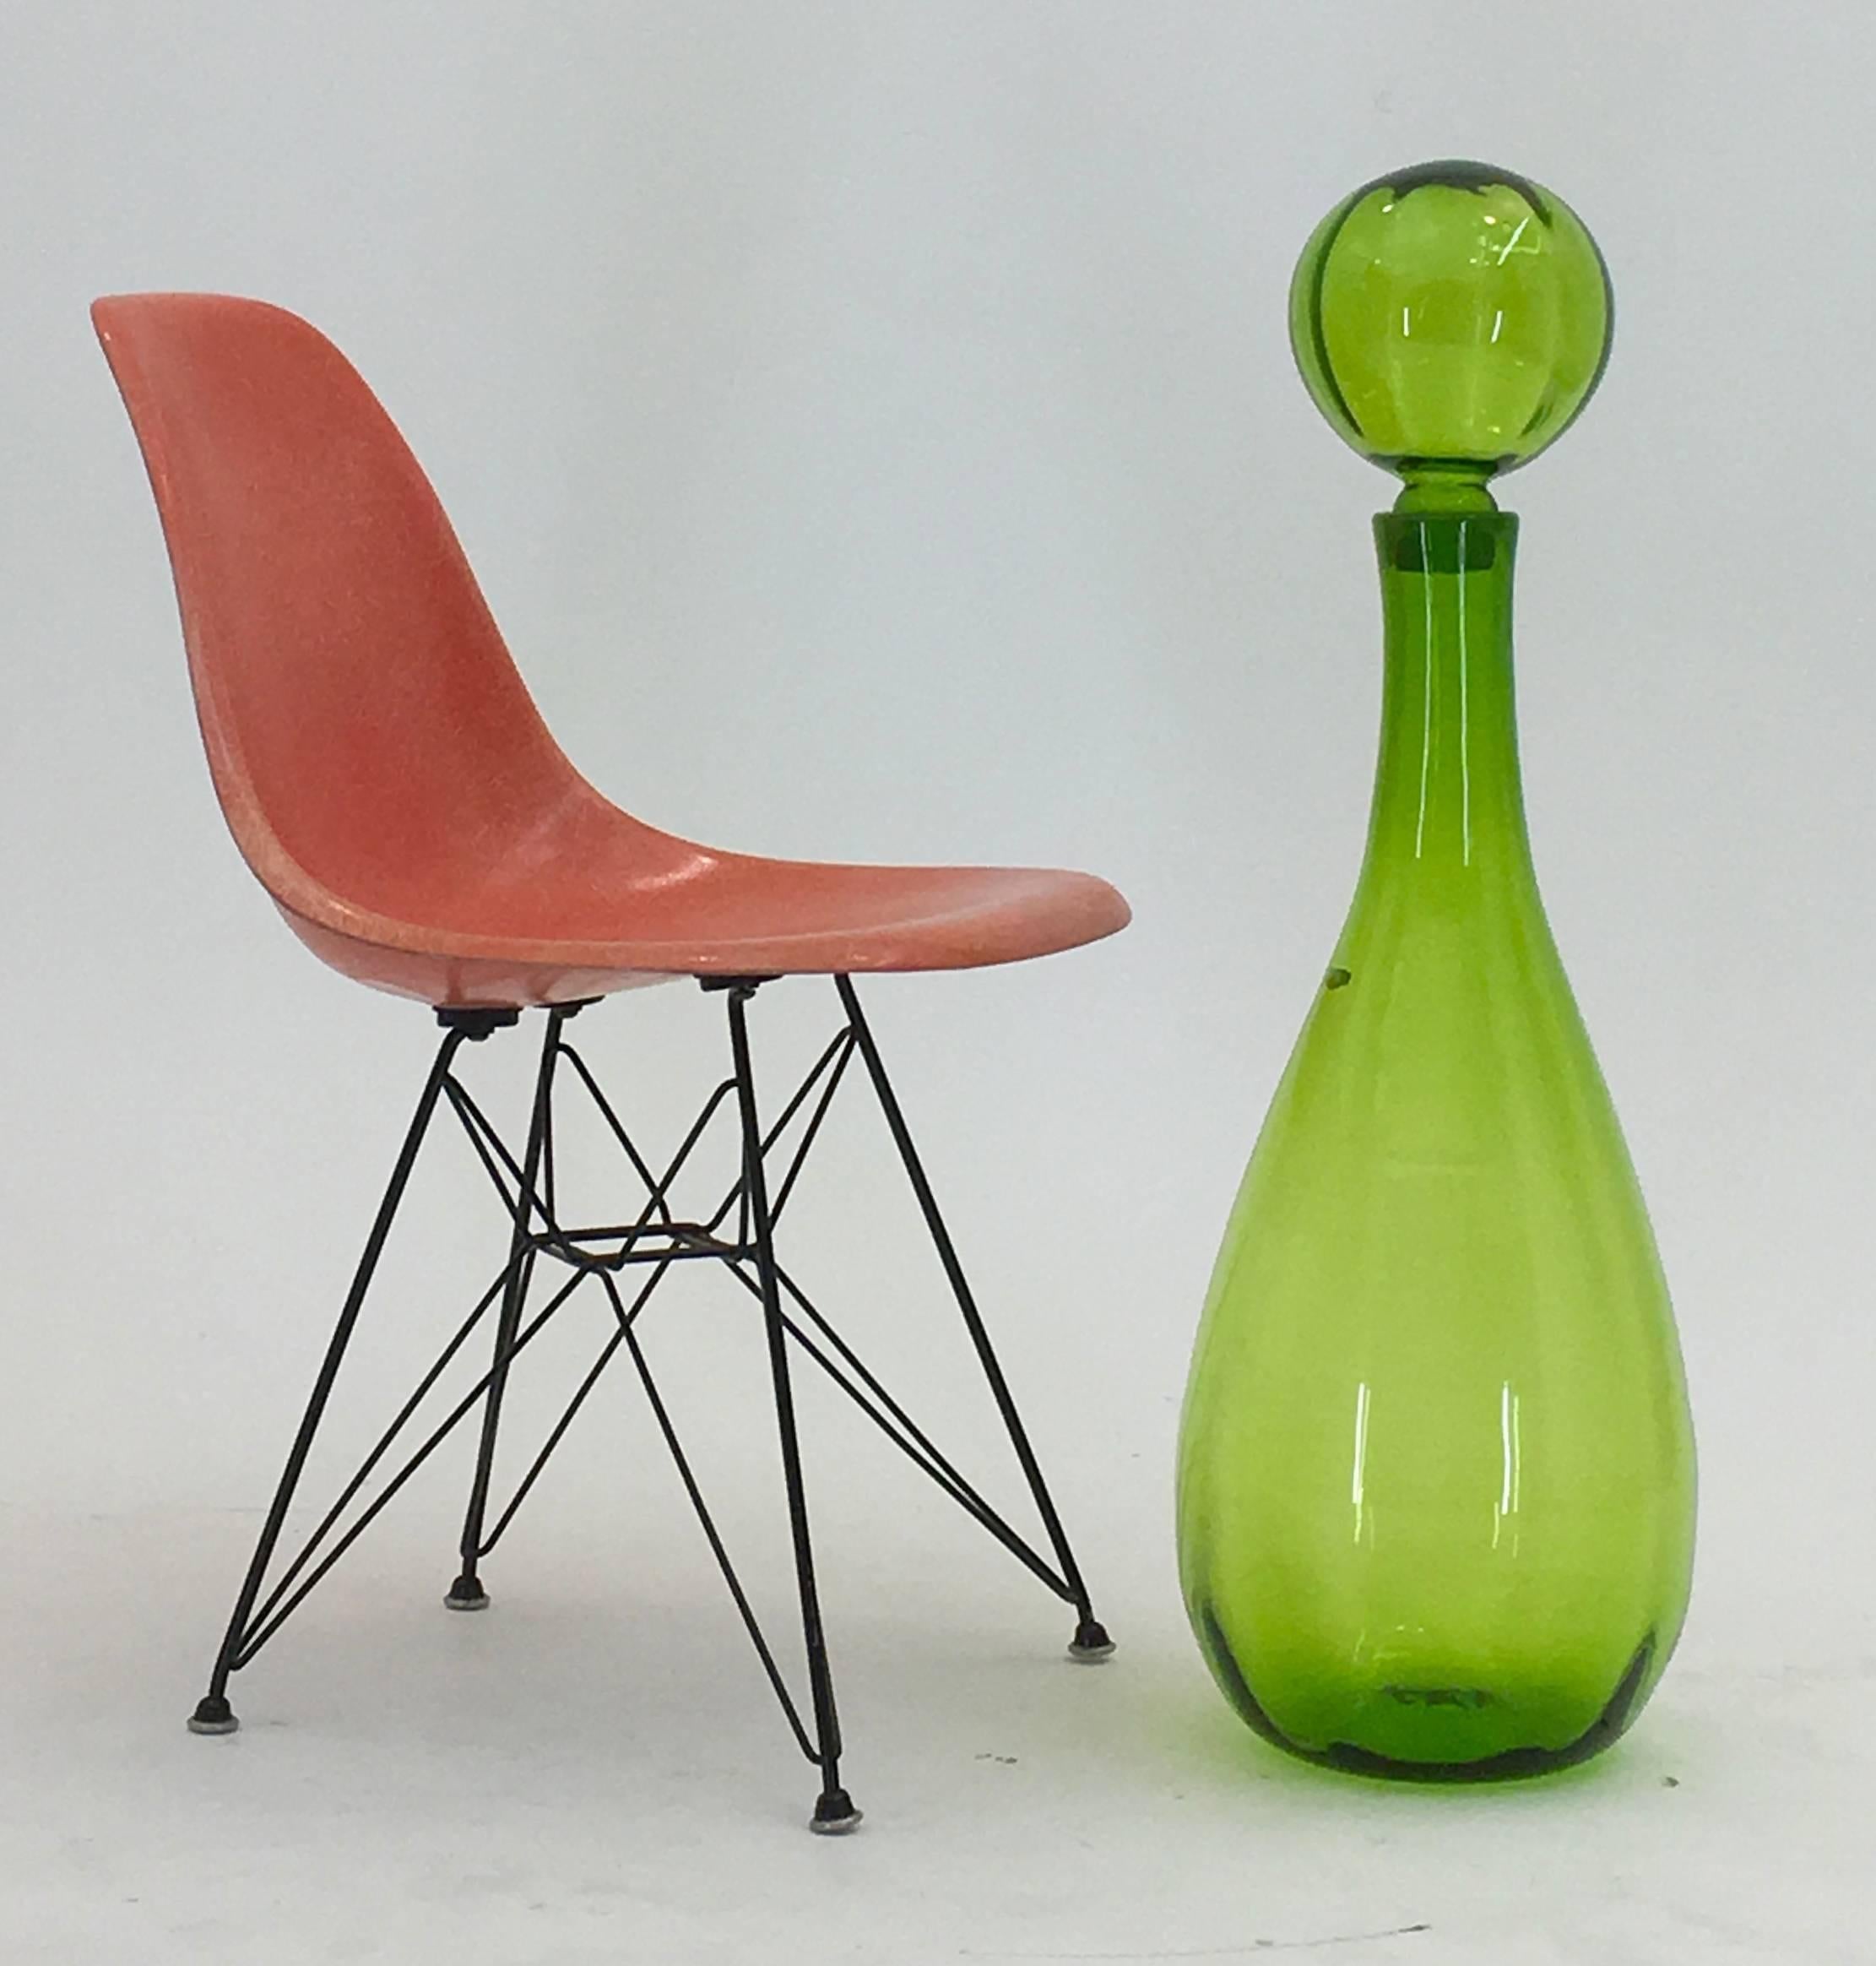 1970
John Nickerson
Blenko, USA
Model 7054

Created by American John Nickerson in 1970 for Blenko, this monumental sized floor decanter model 7054 was produced in limited numbers with a subtle optical effect added via subtle ribbing through the main